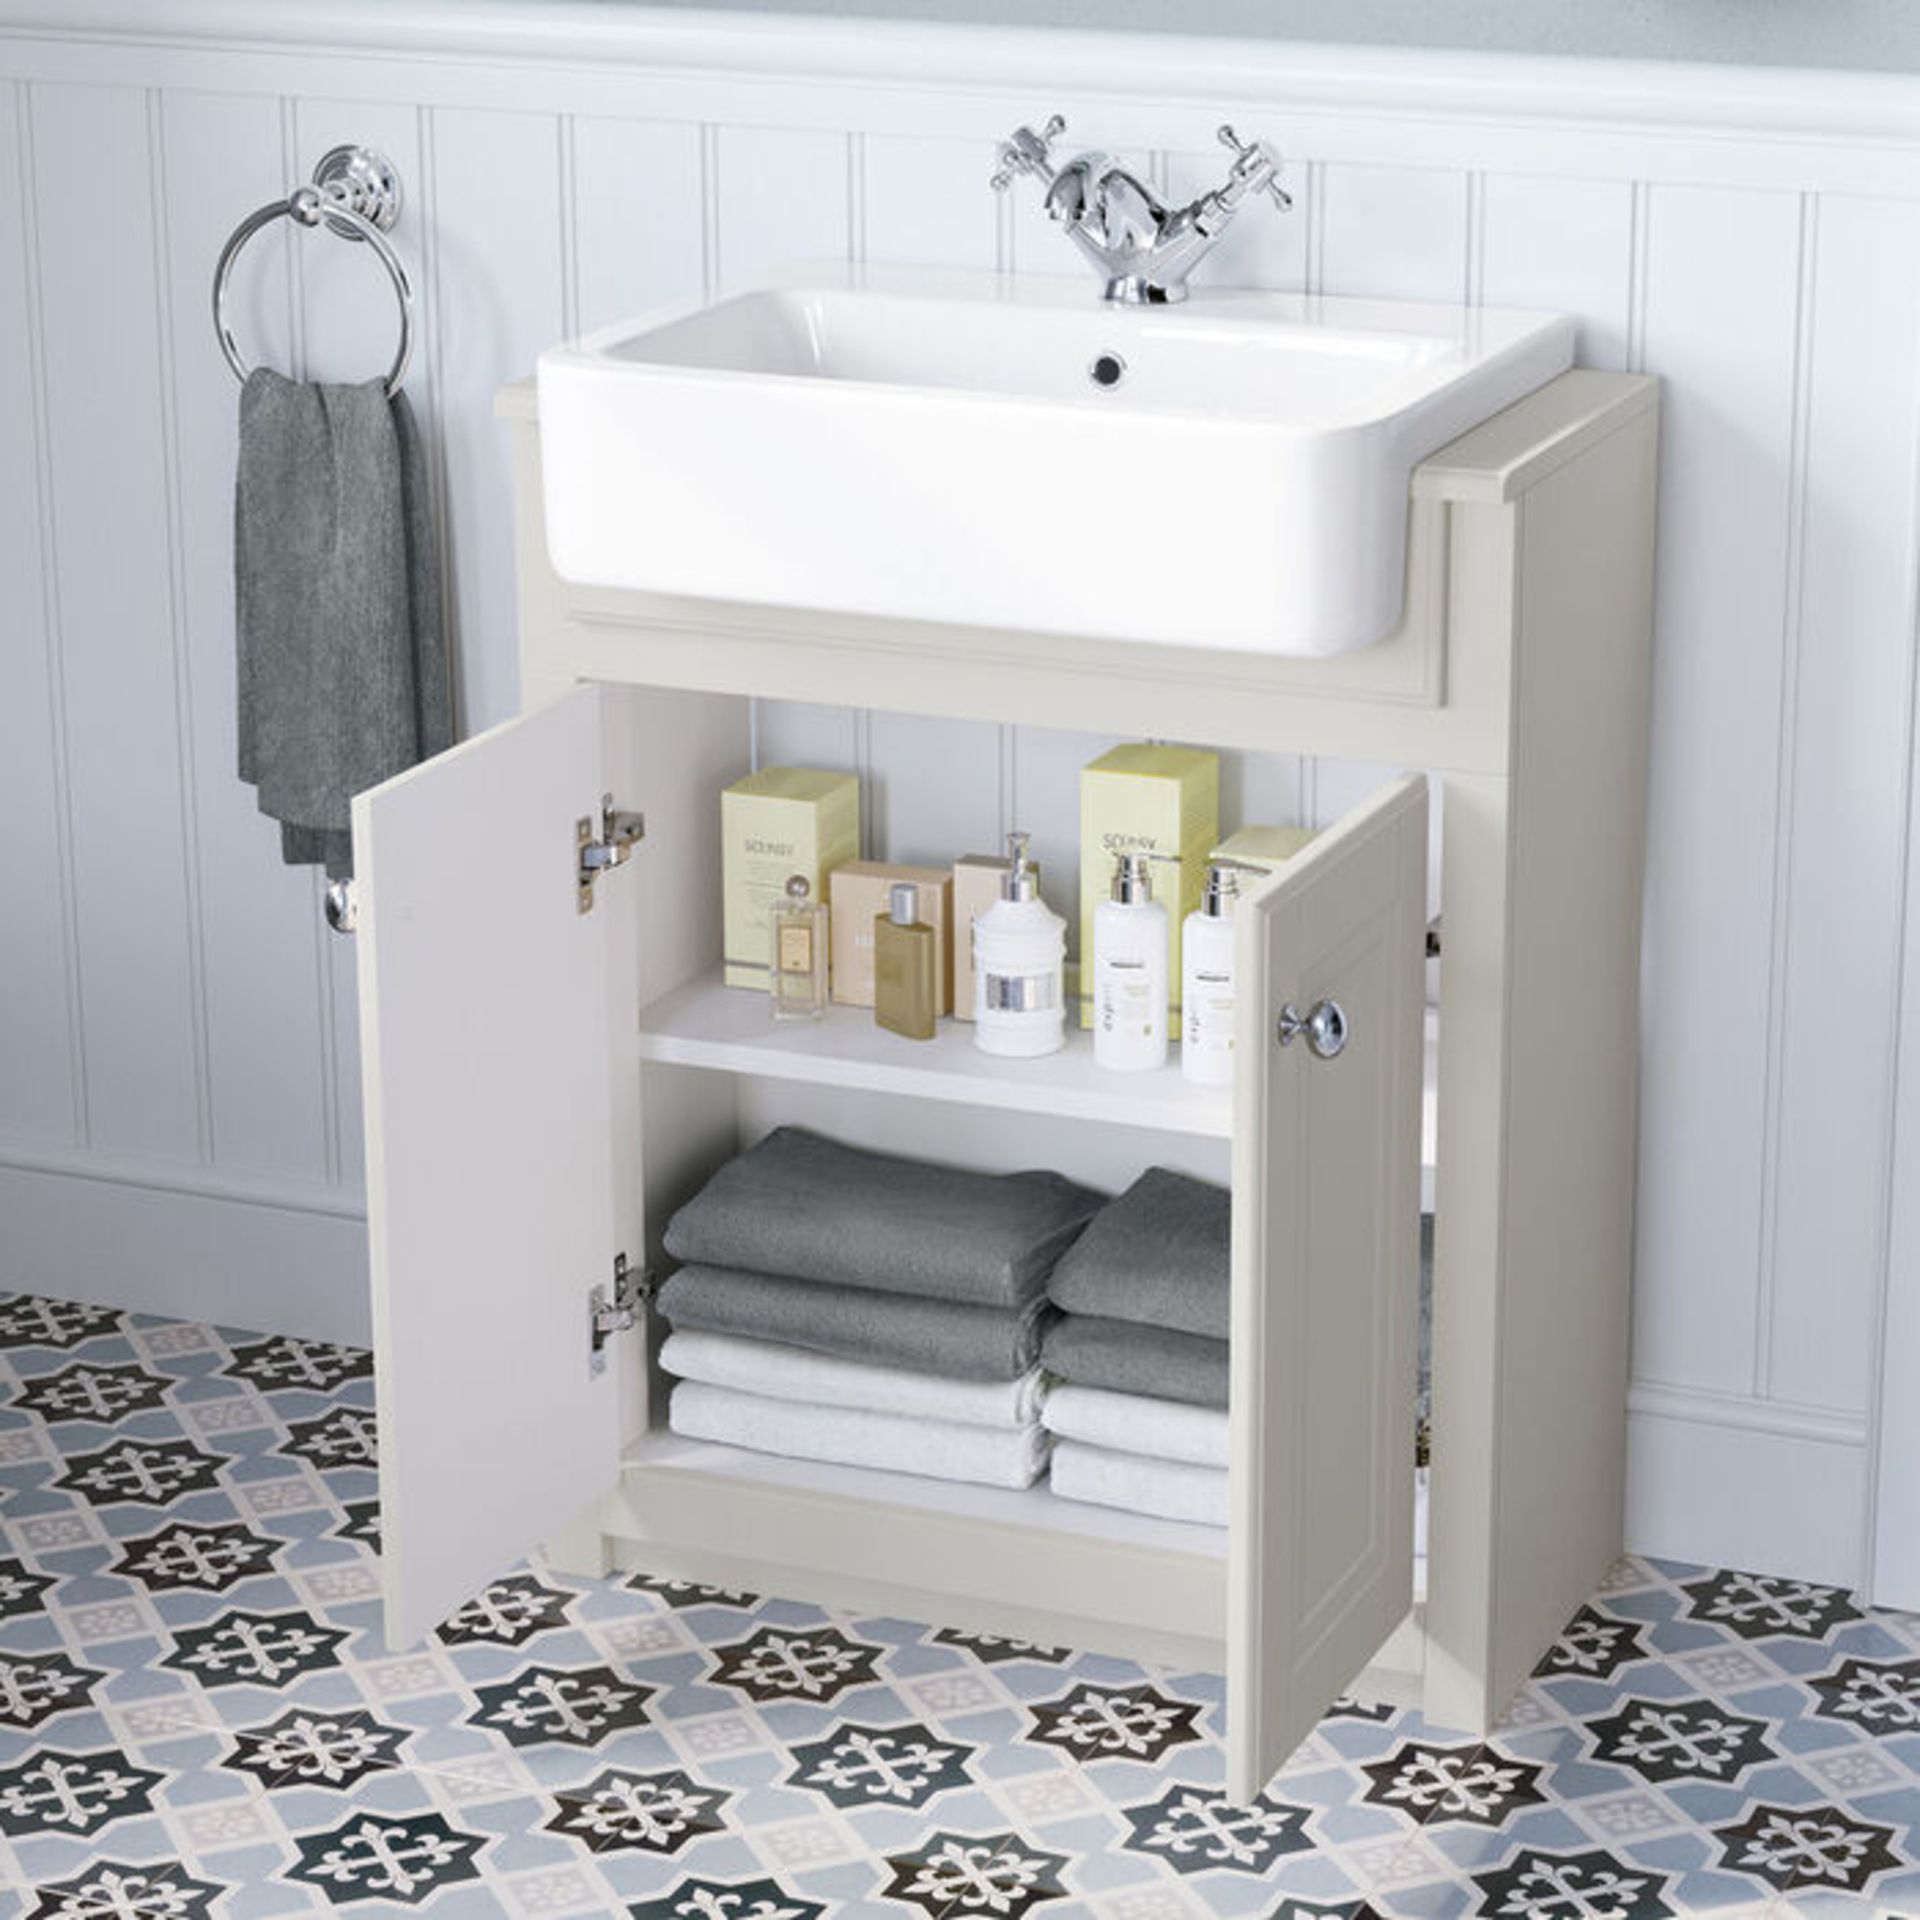 NEW & BOXED 667mm Cambridge Clotted Cream FloorStanding Sink Vanity Unit. RRP £749.99.Comes c... - Image 2 of 3